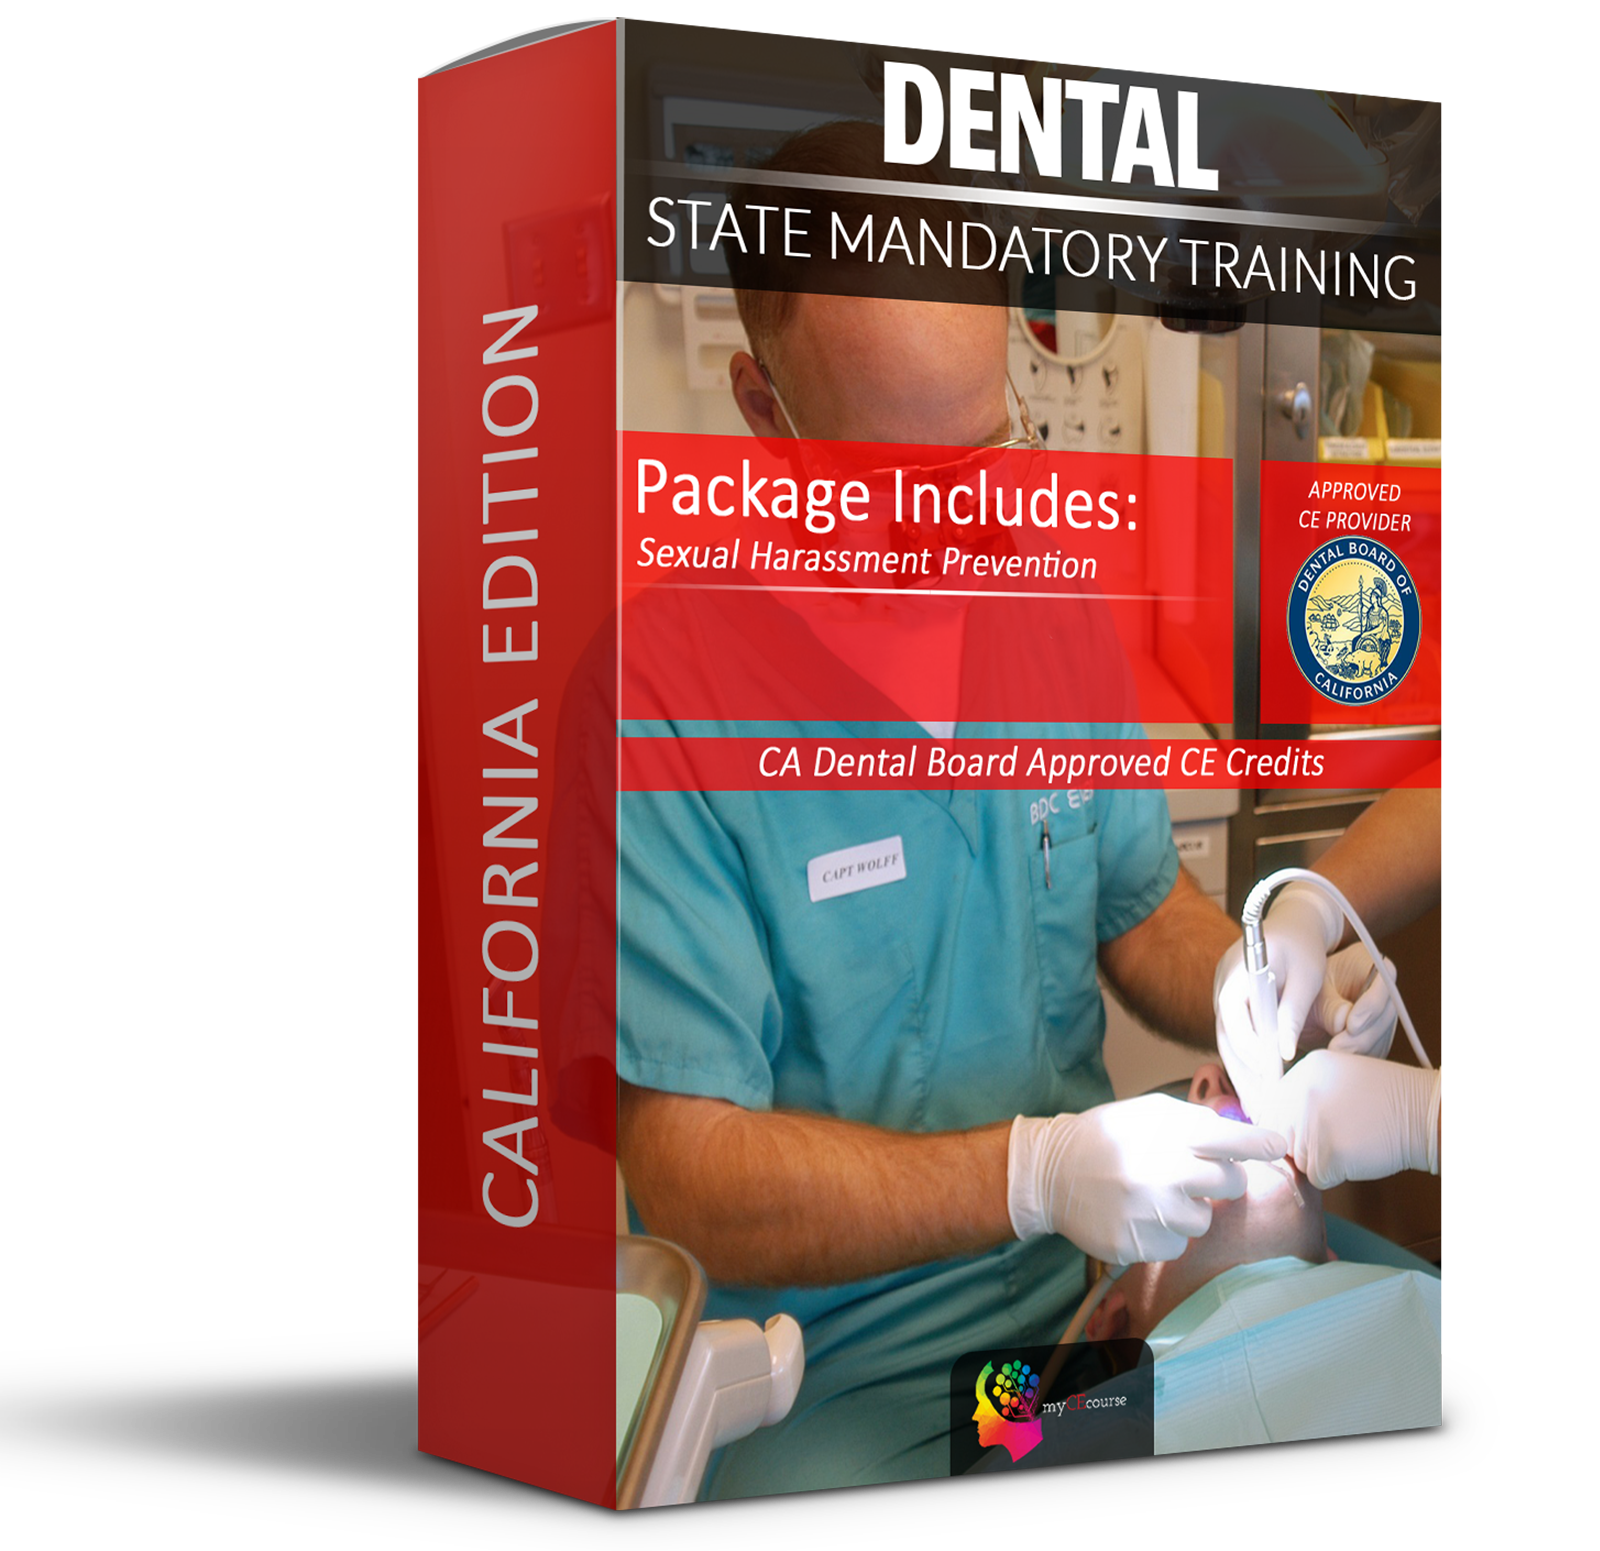 California Dental Industry Faces New Mandatory Training Requirements In 2020 That Could Cost Business Owners Thousands.